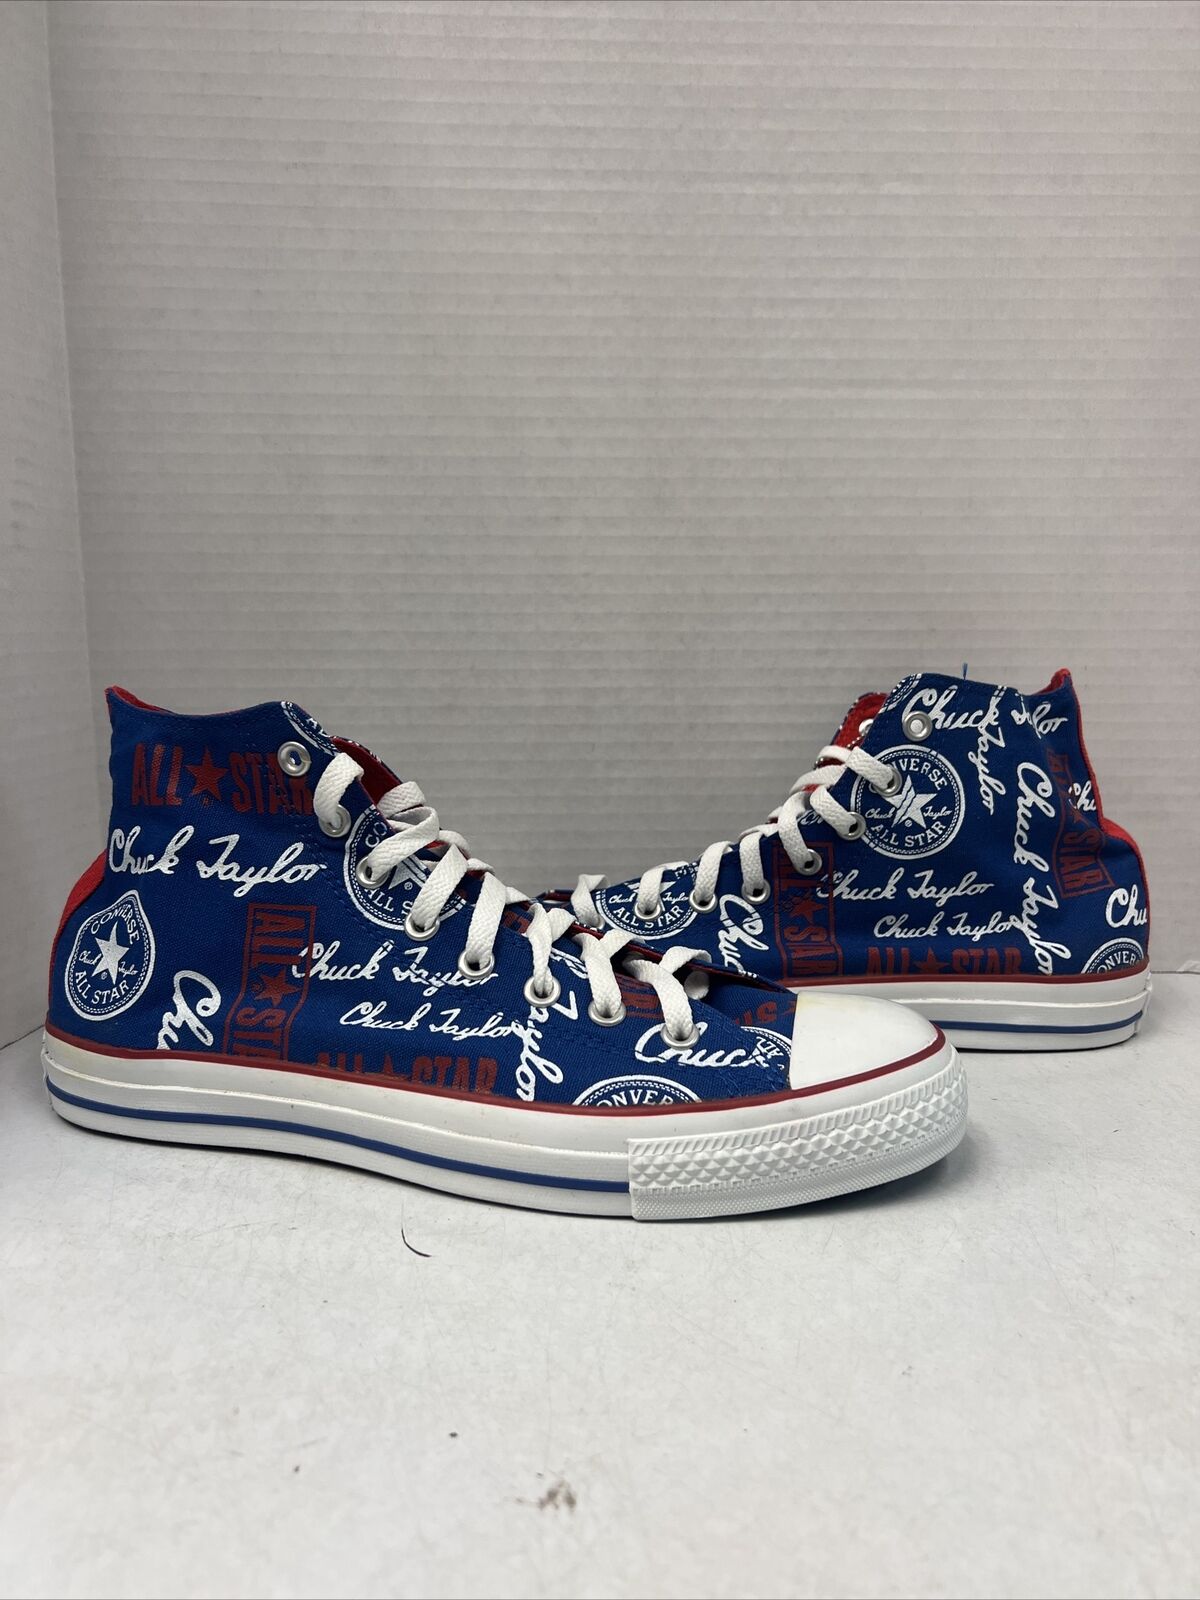 Converse Chuck Taylor All Star Blue Red Writing Size 11 Brand New 1Q504 |  eBay